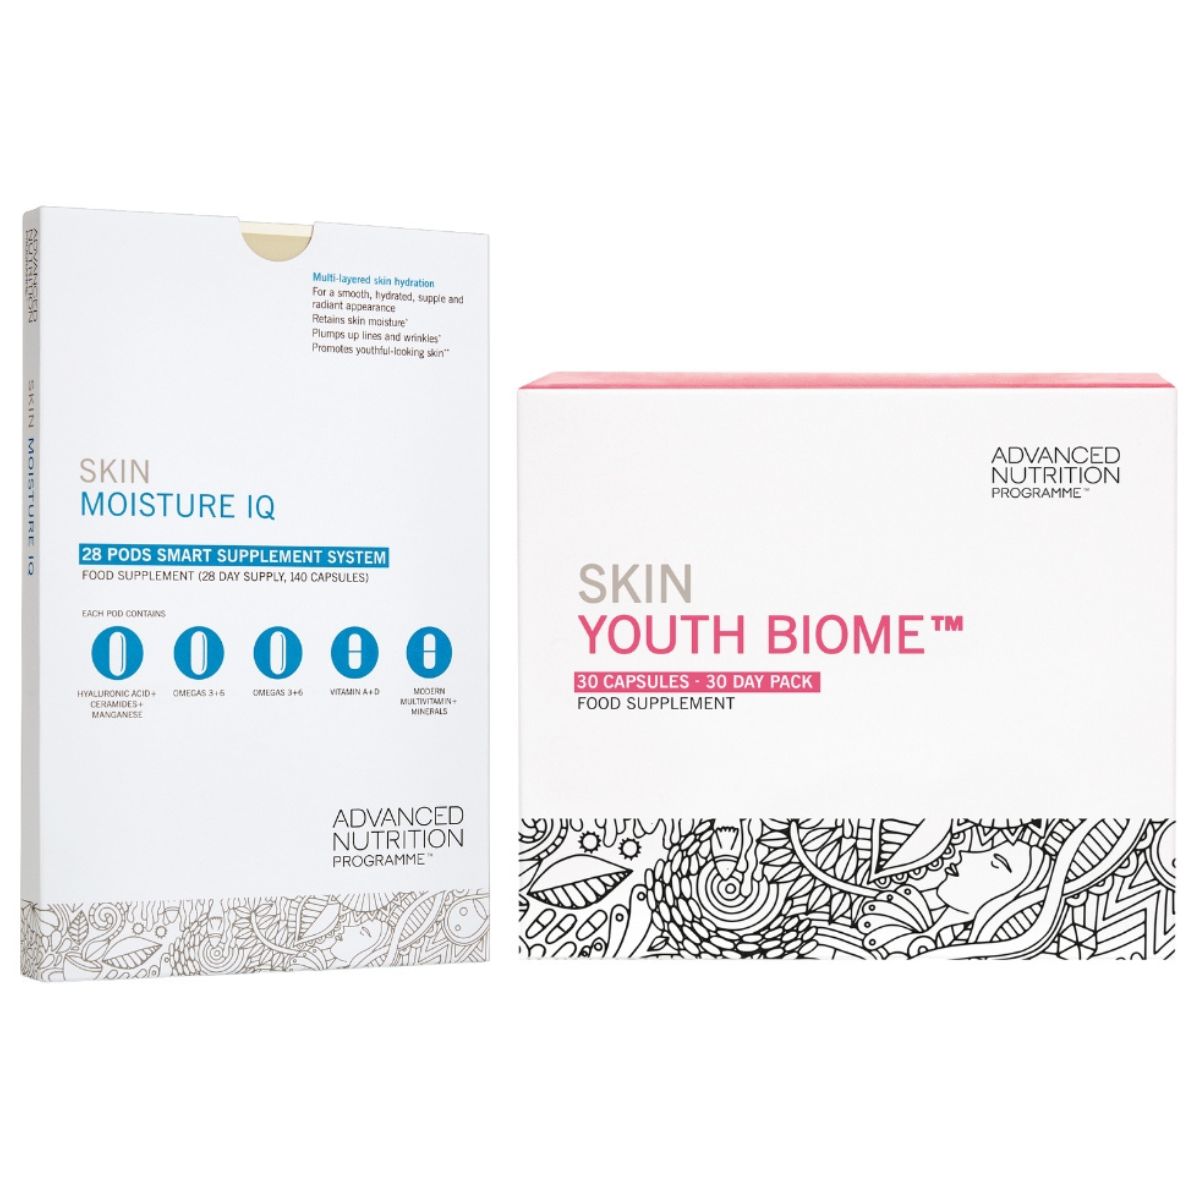 Advanced Nutrition Programme Skin Moisture IQ Complimentary Skin Youth Biome 30 Day